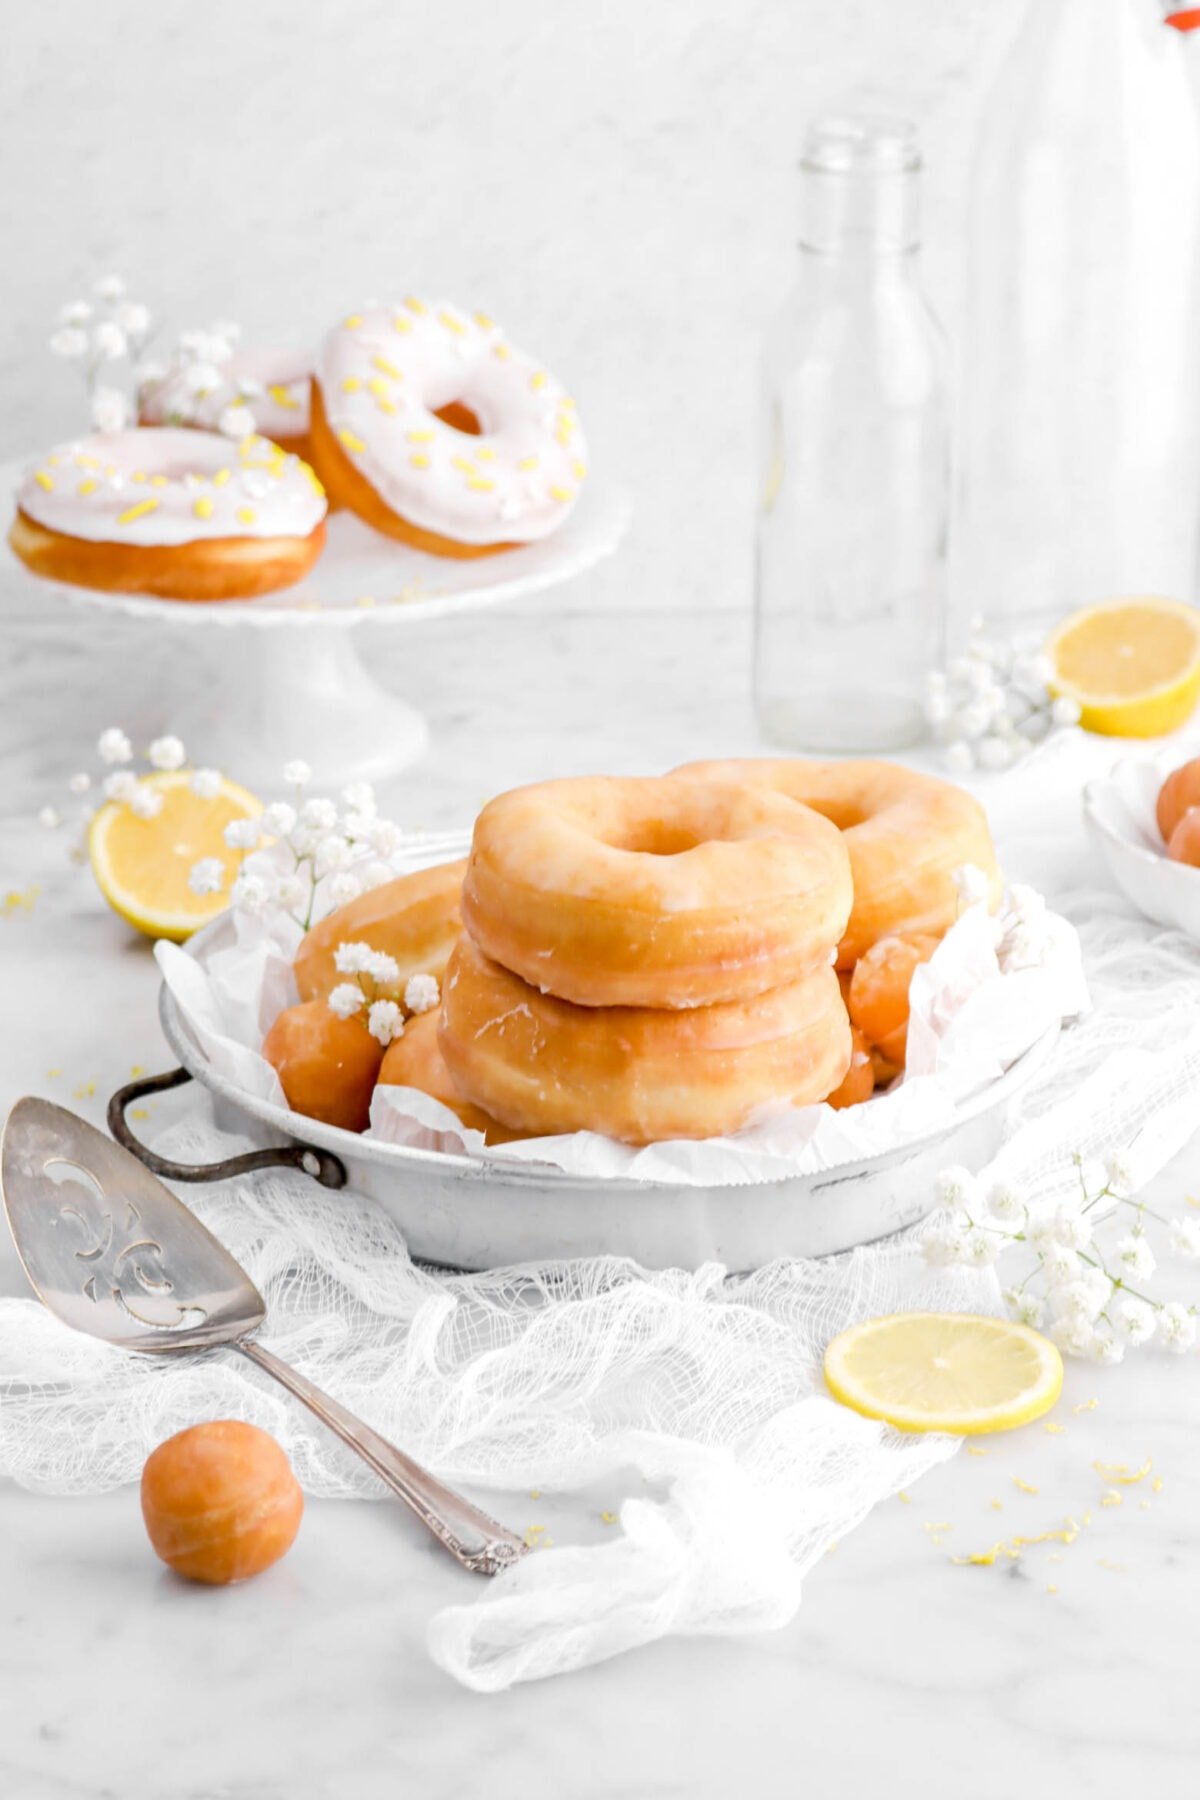 lemon doughnuts stacked in old cake pan on top of a white cheesecloth with cake knife beside and doughnut hole. Three dipped doughnuts on white cake stand behind with lemon halves and flowers.